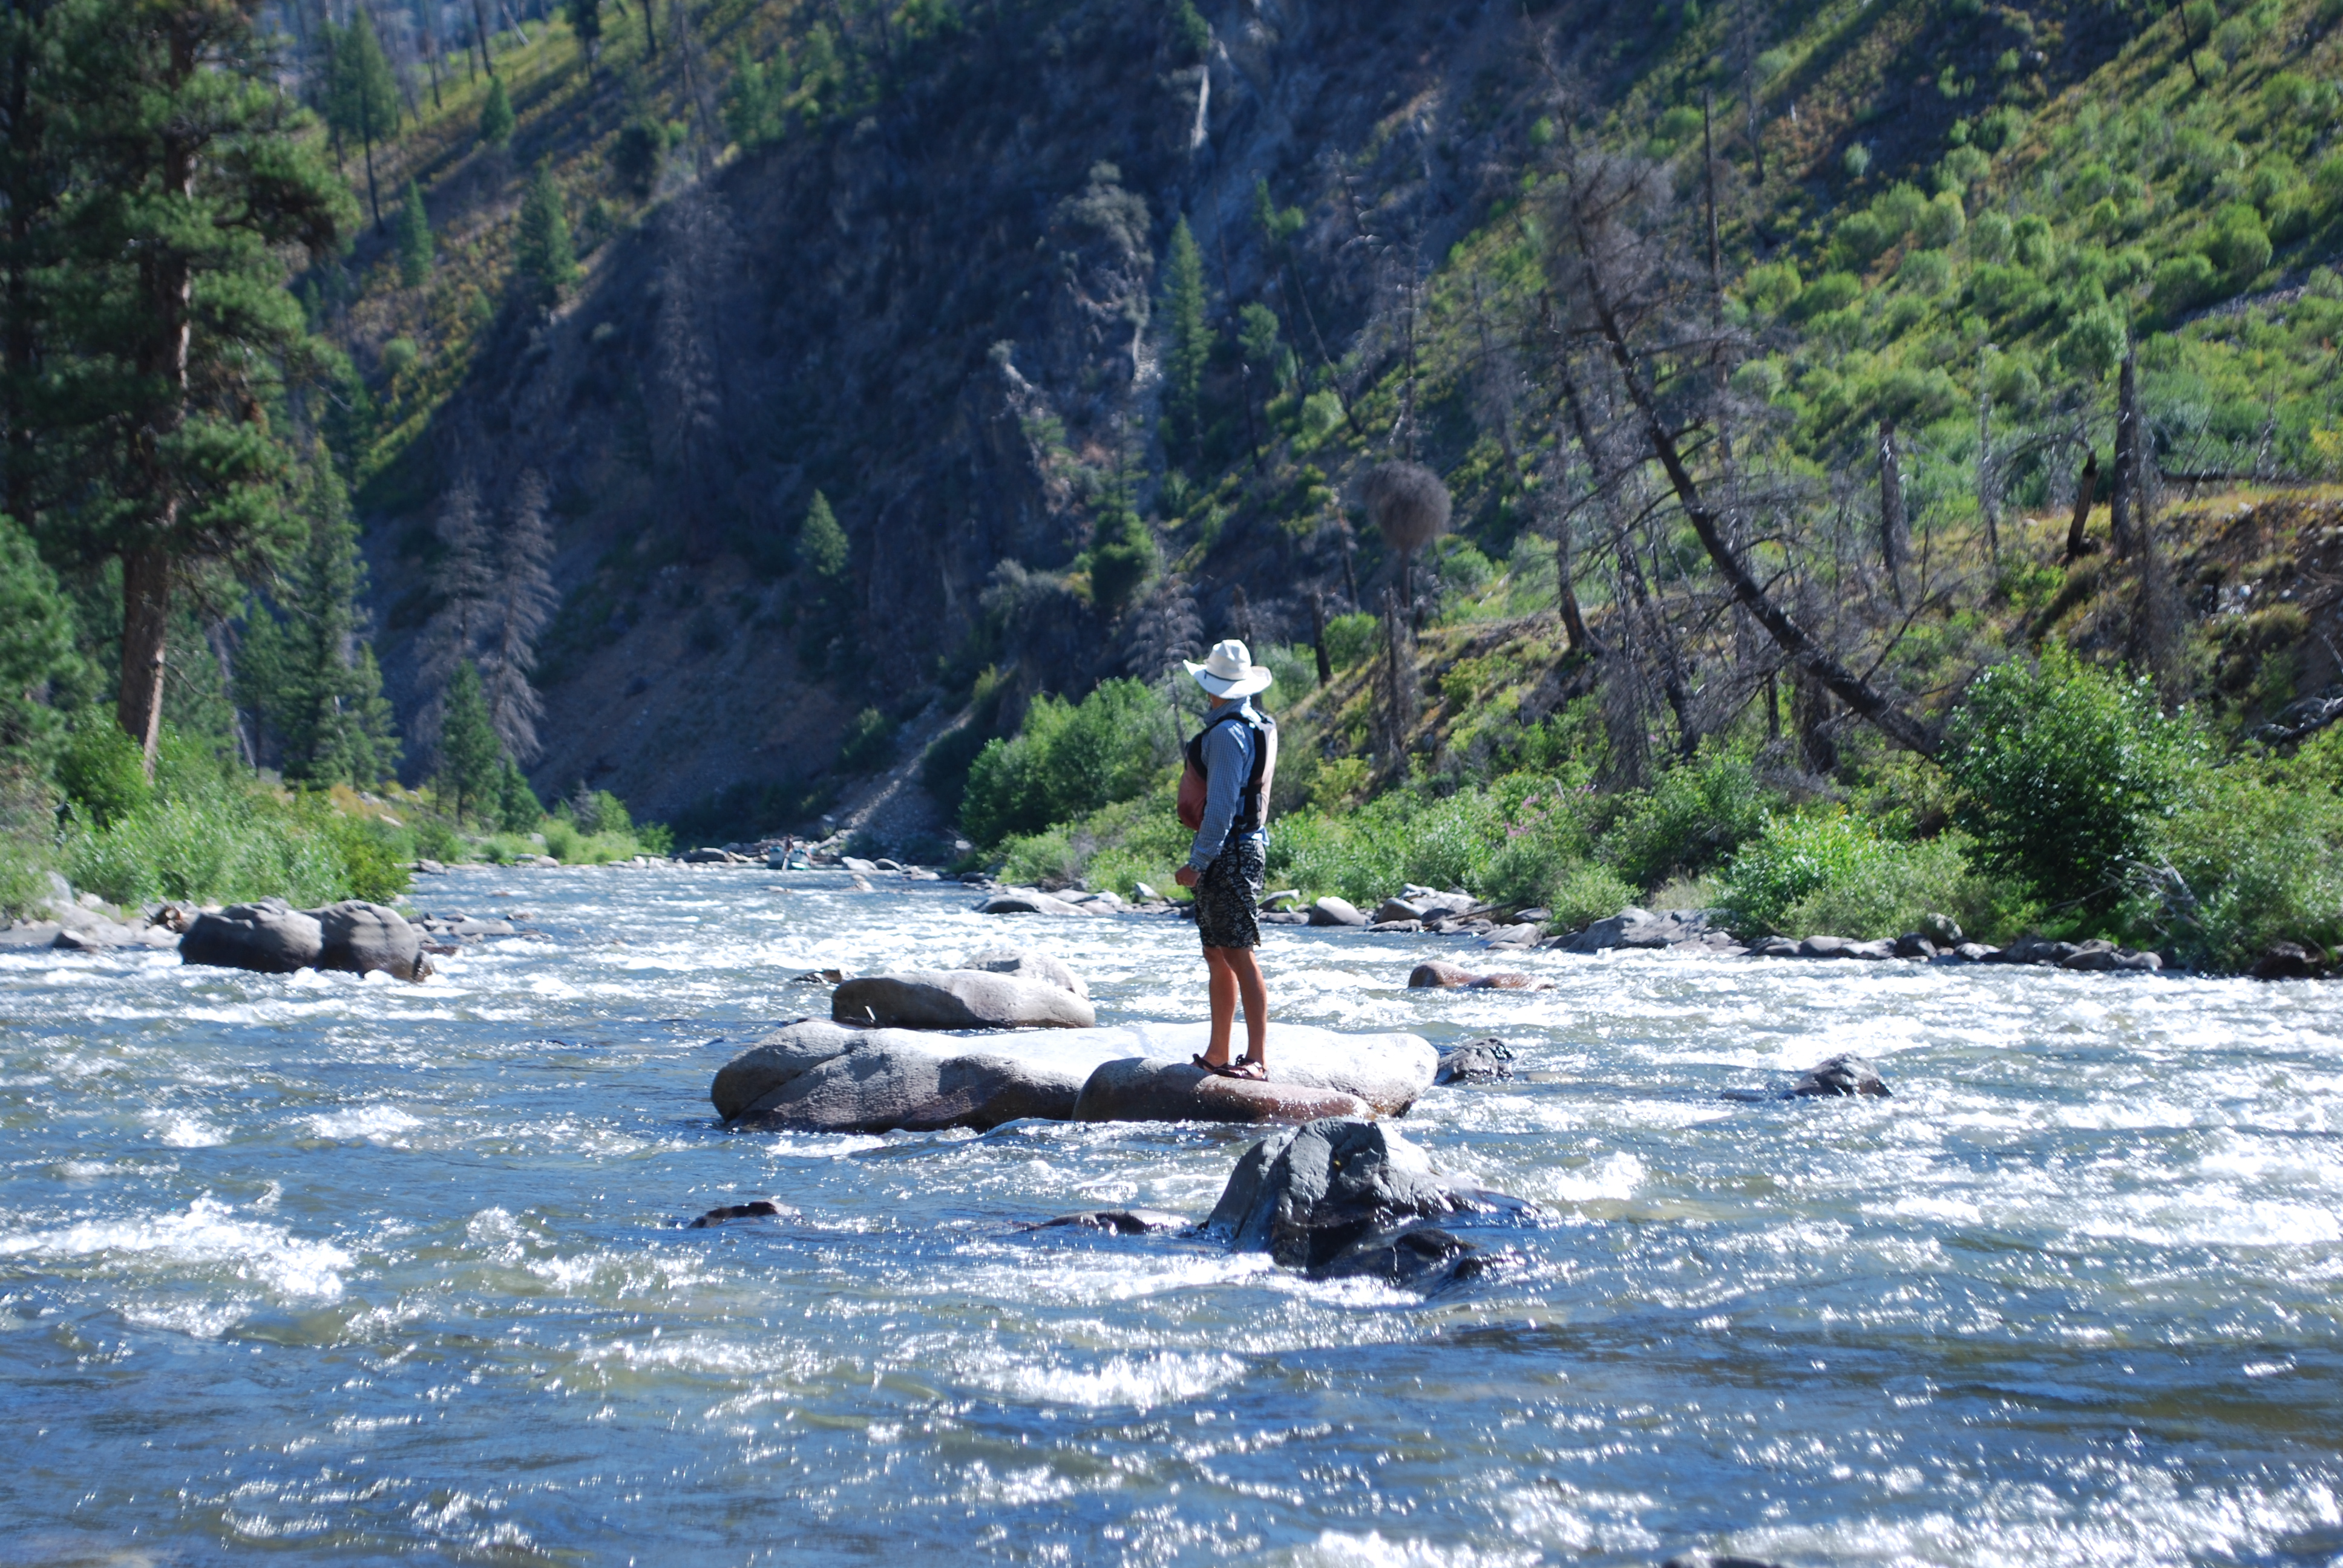 The Middle Fork offers fantastic fishing opportunities